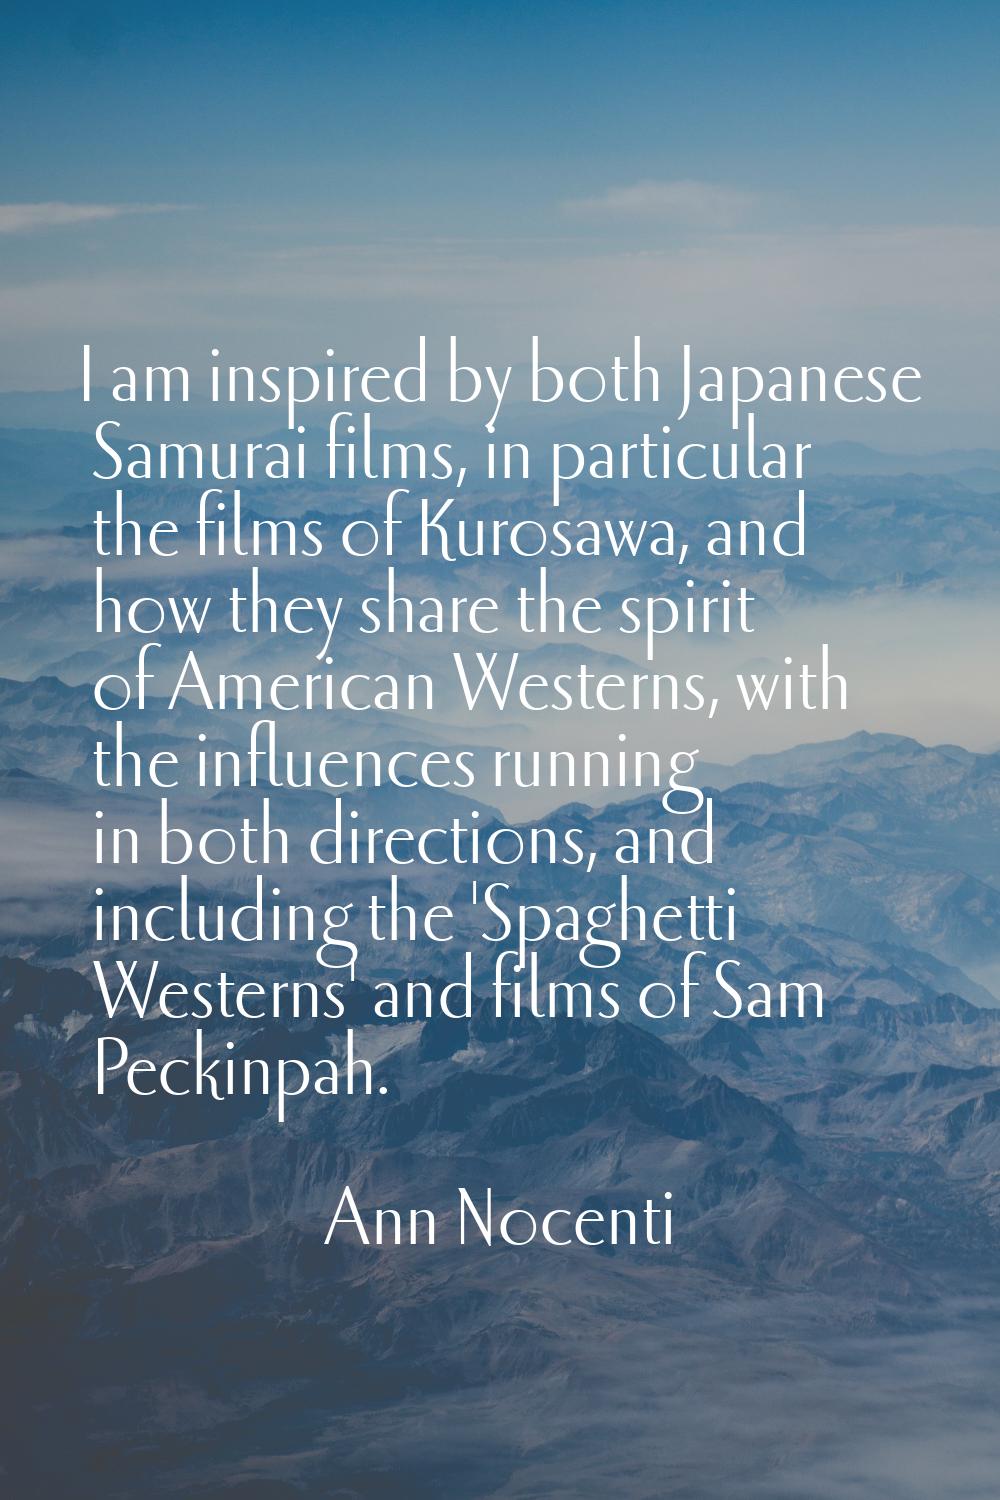 I am inspired by both Japanese Samurai films, in particular the films of Kurosawa, and how they sha